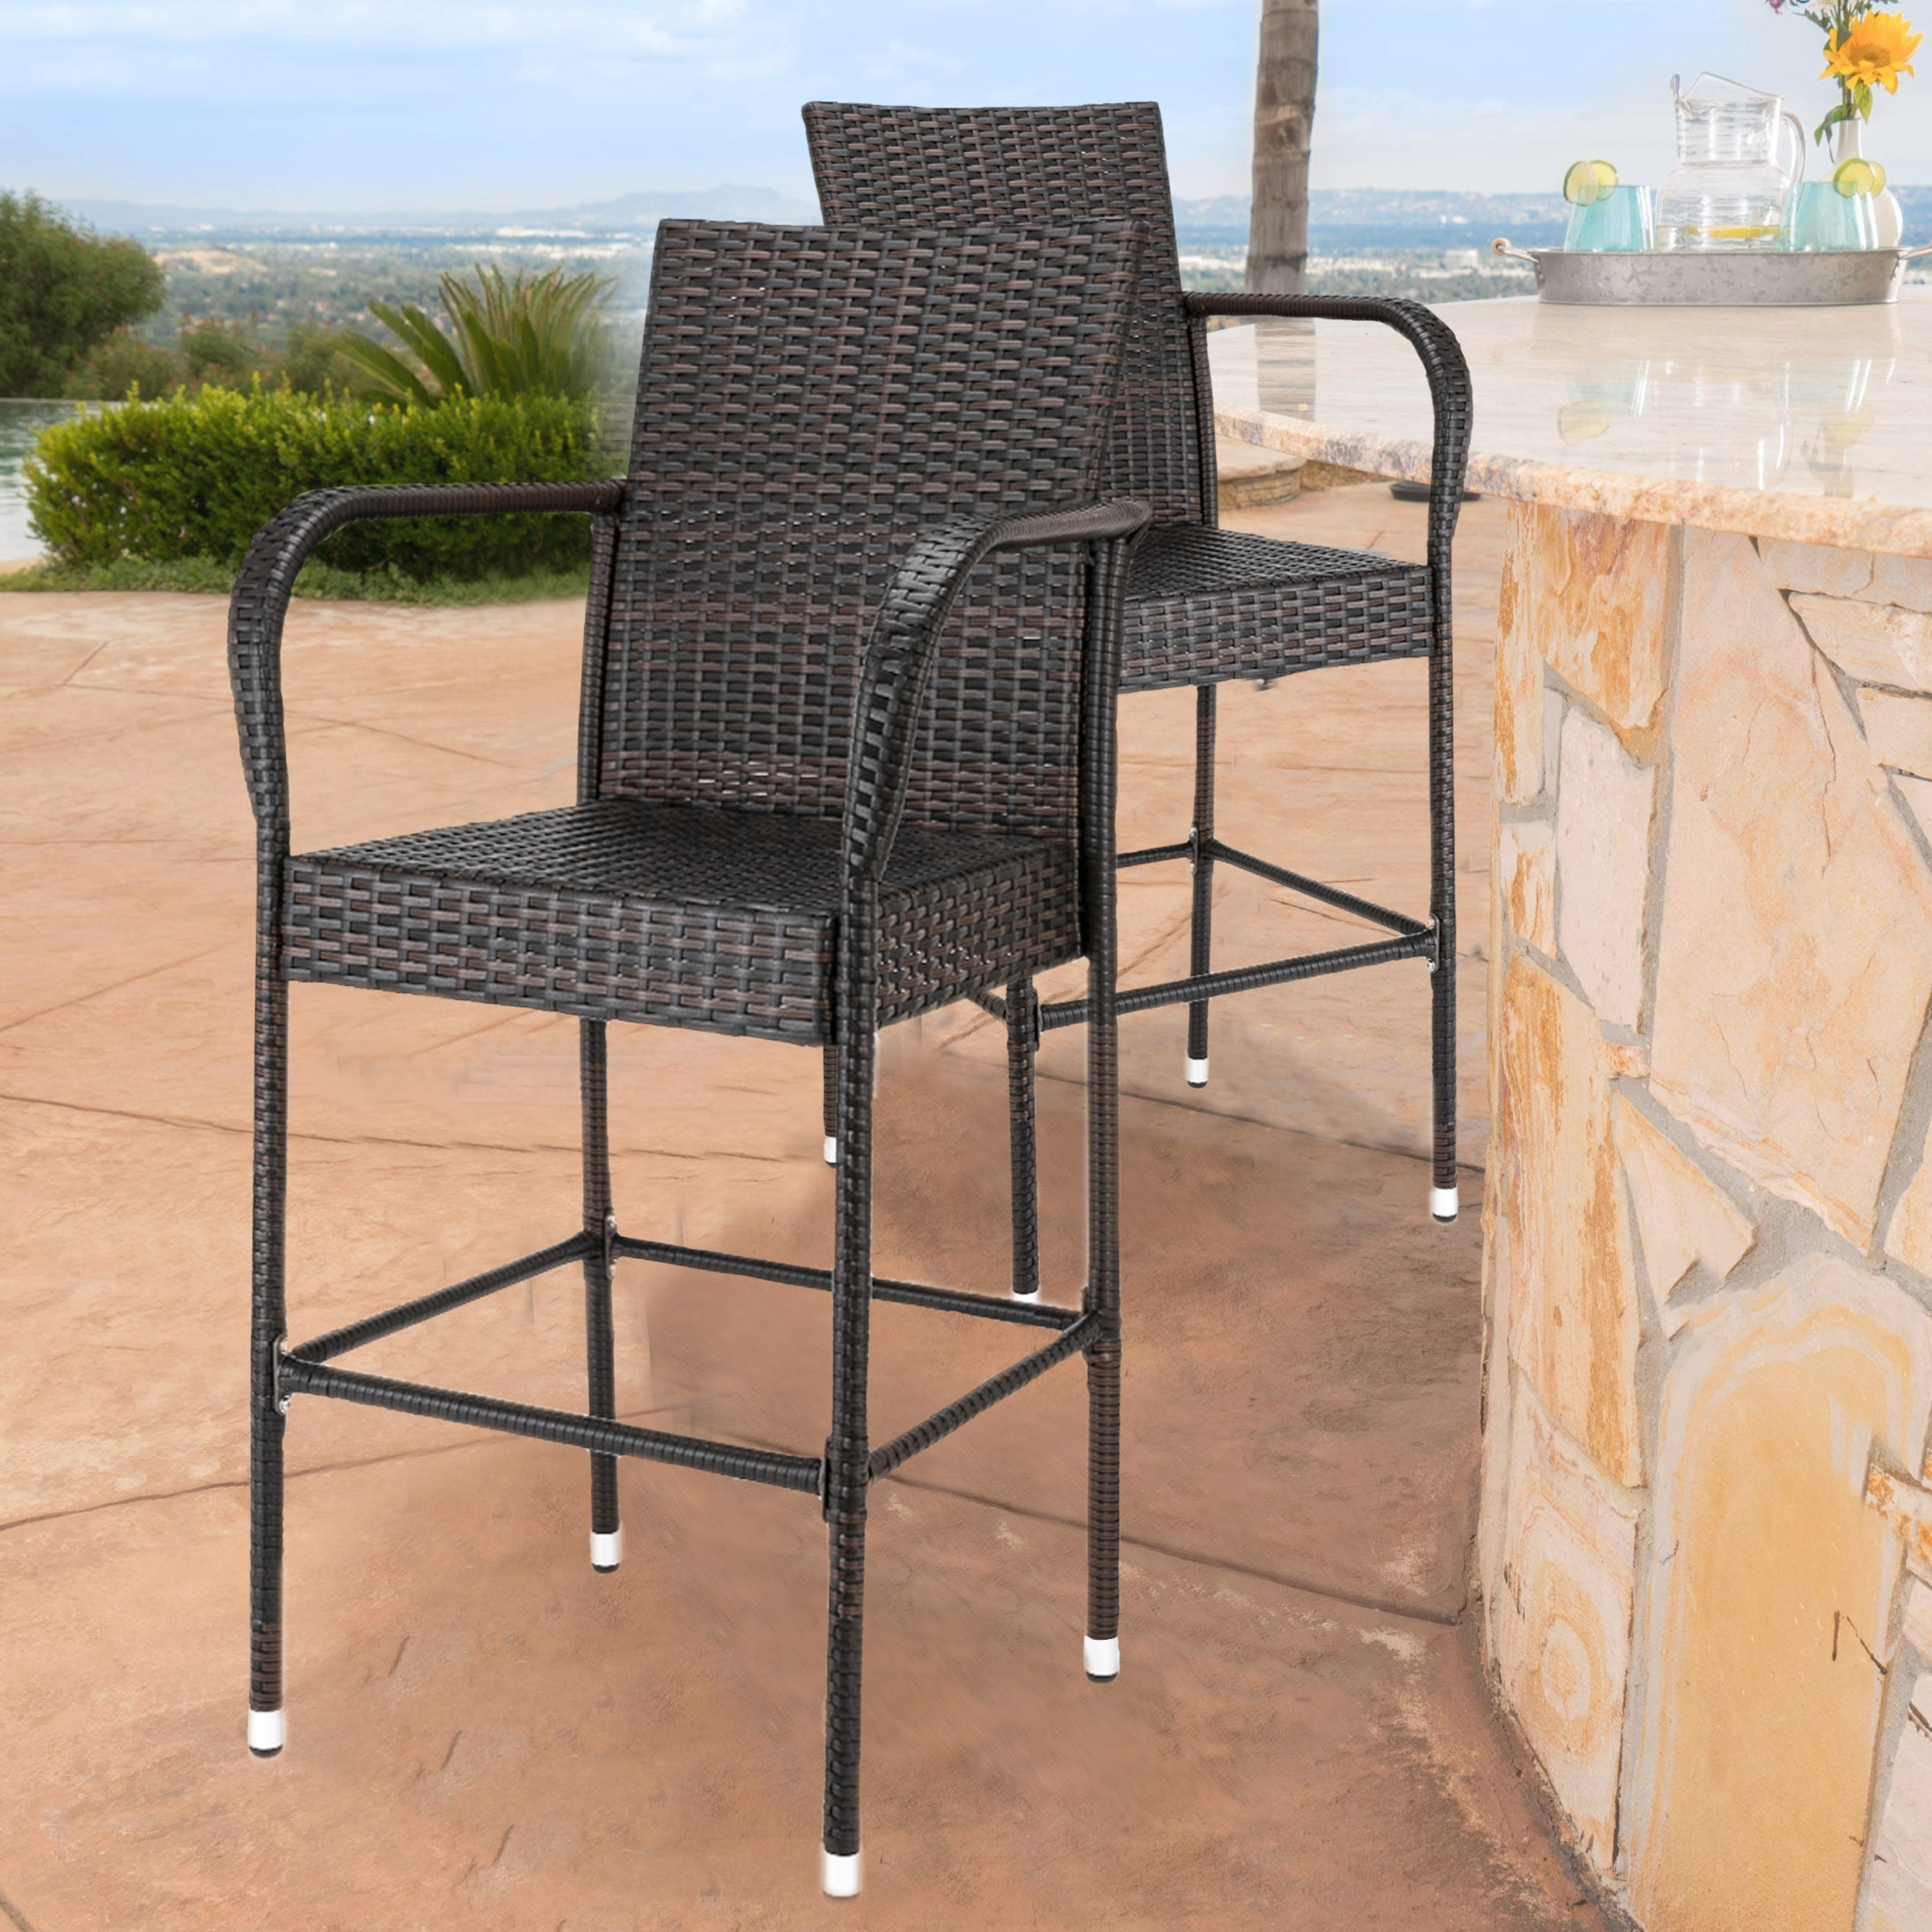 Outdoor Brown Wicker Barstool, UHOMEPRO Outdoor Patio Furniture Bar Stool Set of 2, Rattan Bar Chairs with Iron Frame, Armrest, Footrest, Counter Height Chairs for Garden Pool Lawn Backyard, W2114 - image 5 of 11